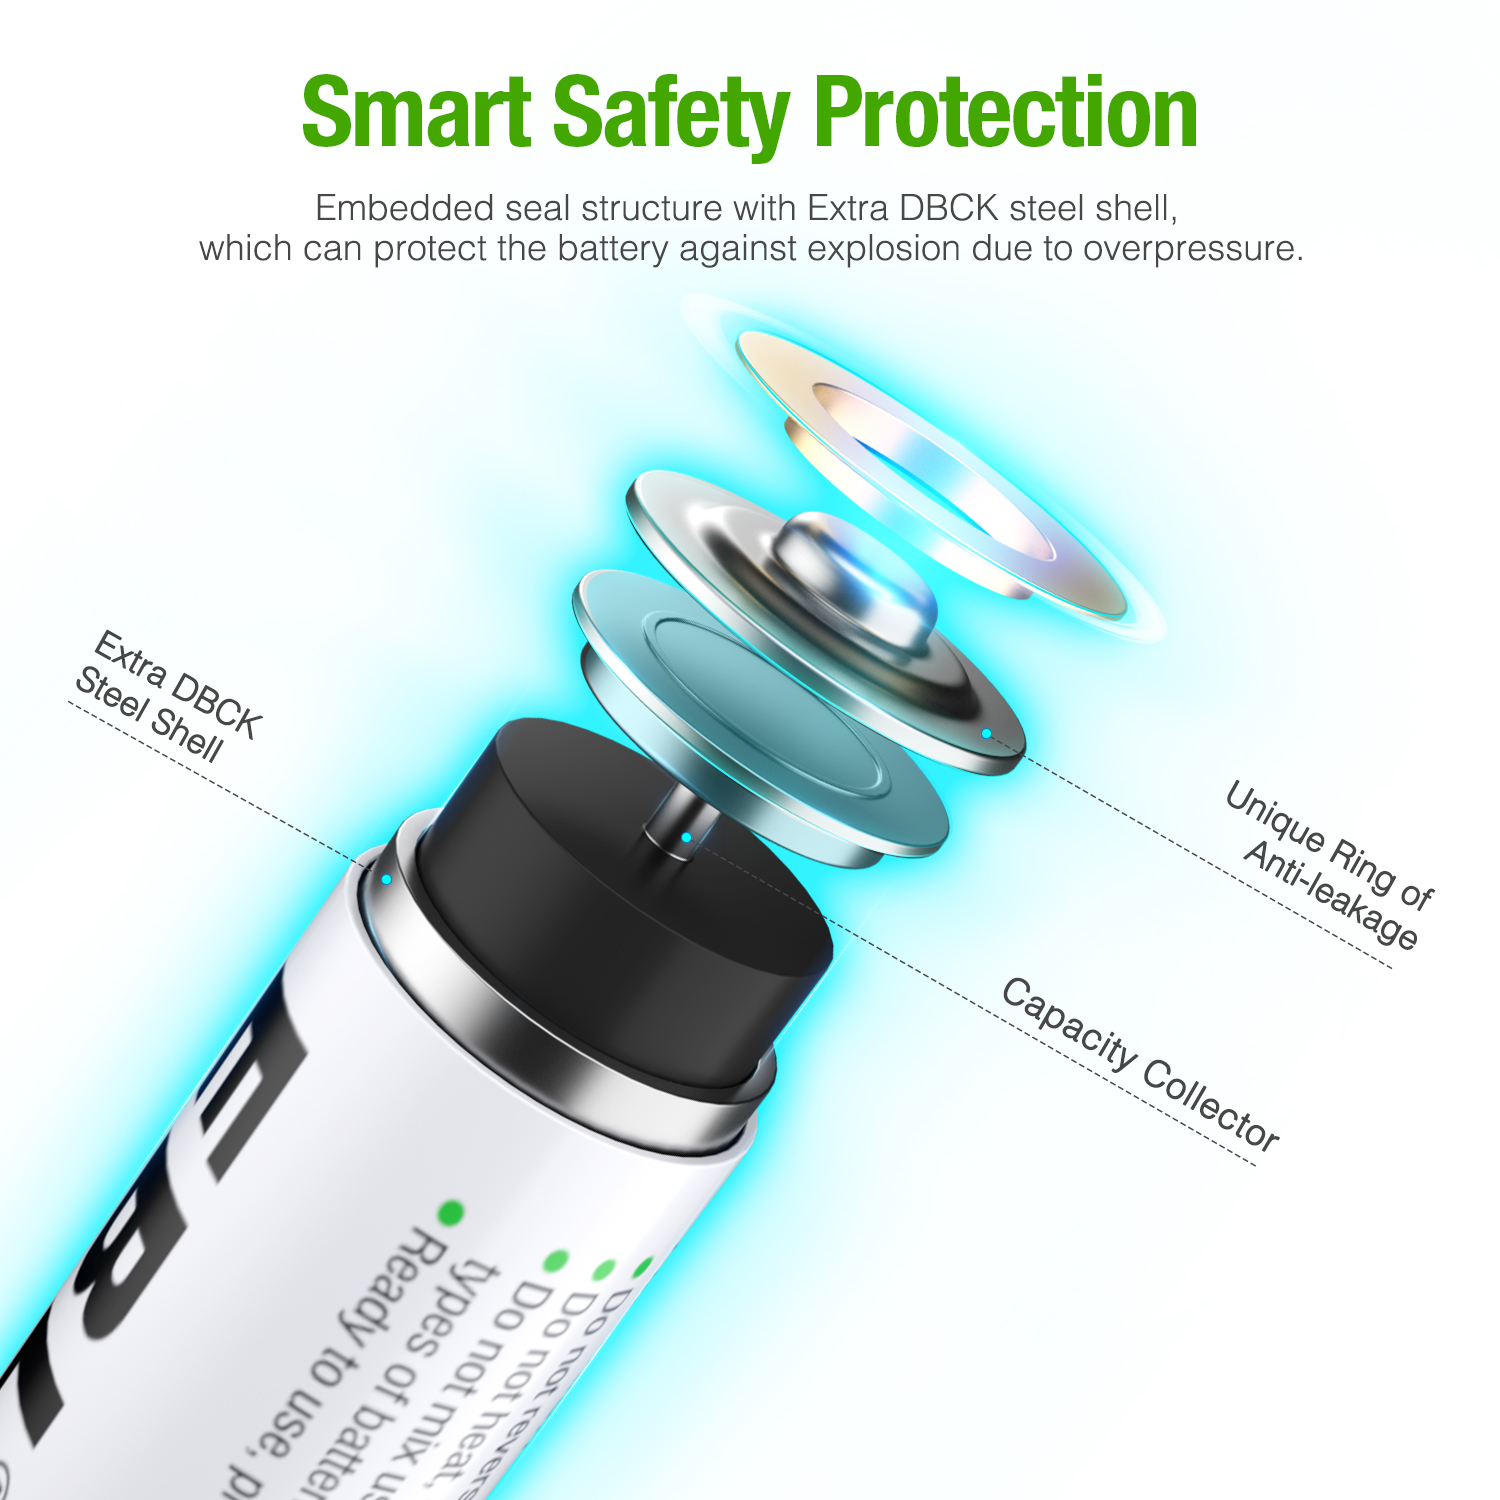 Smart Safety Protection